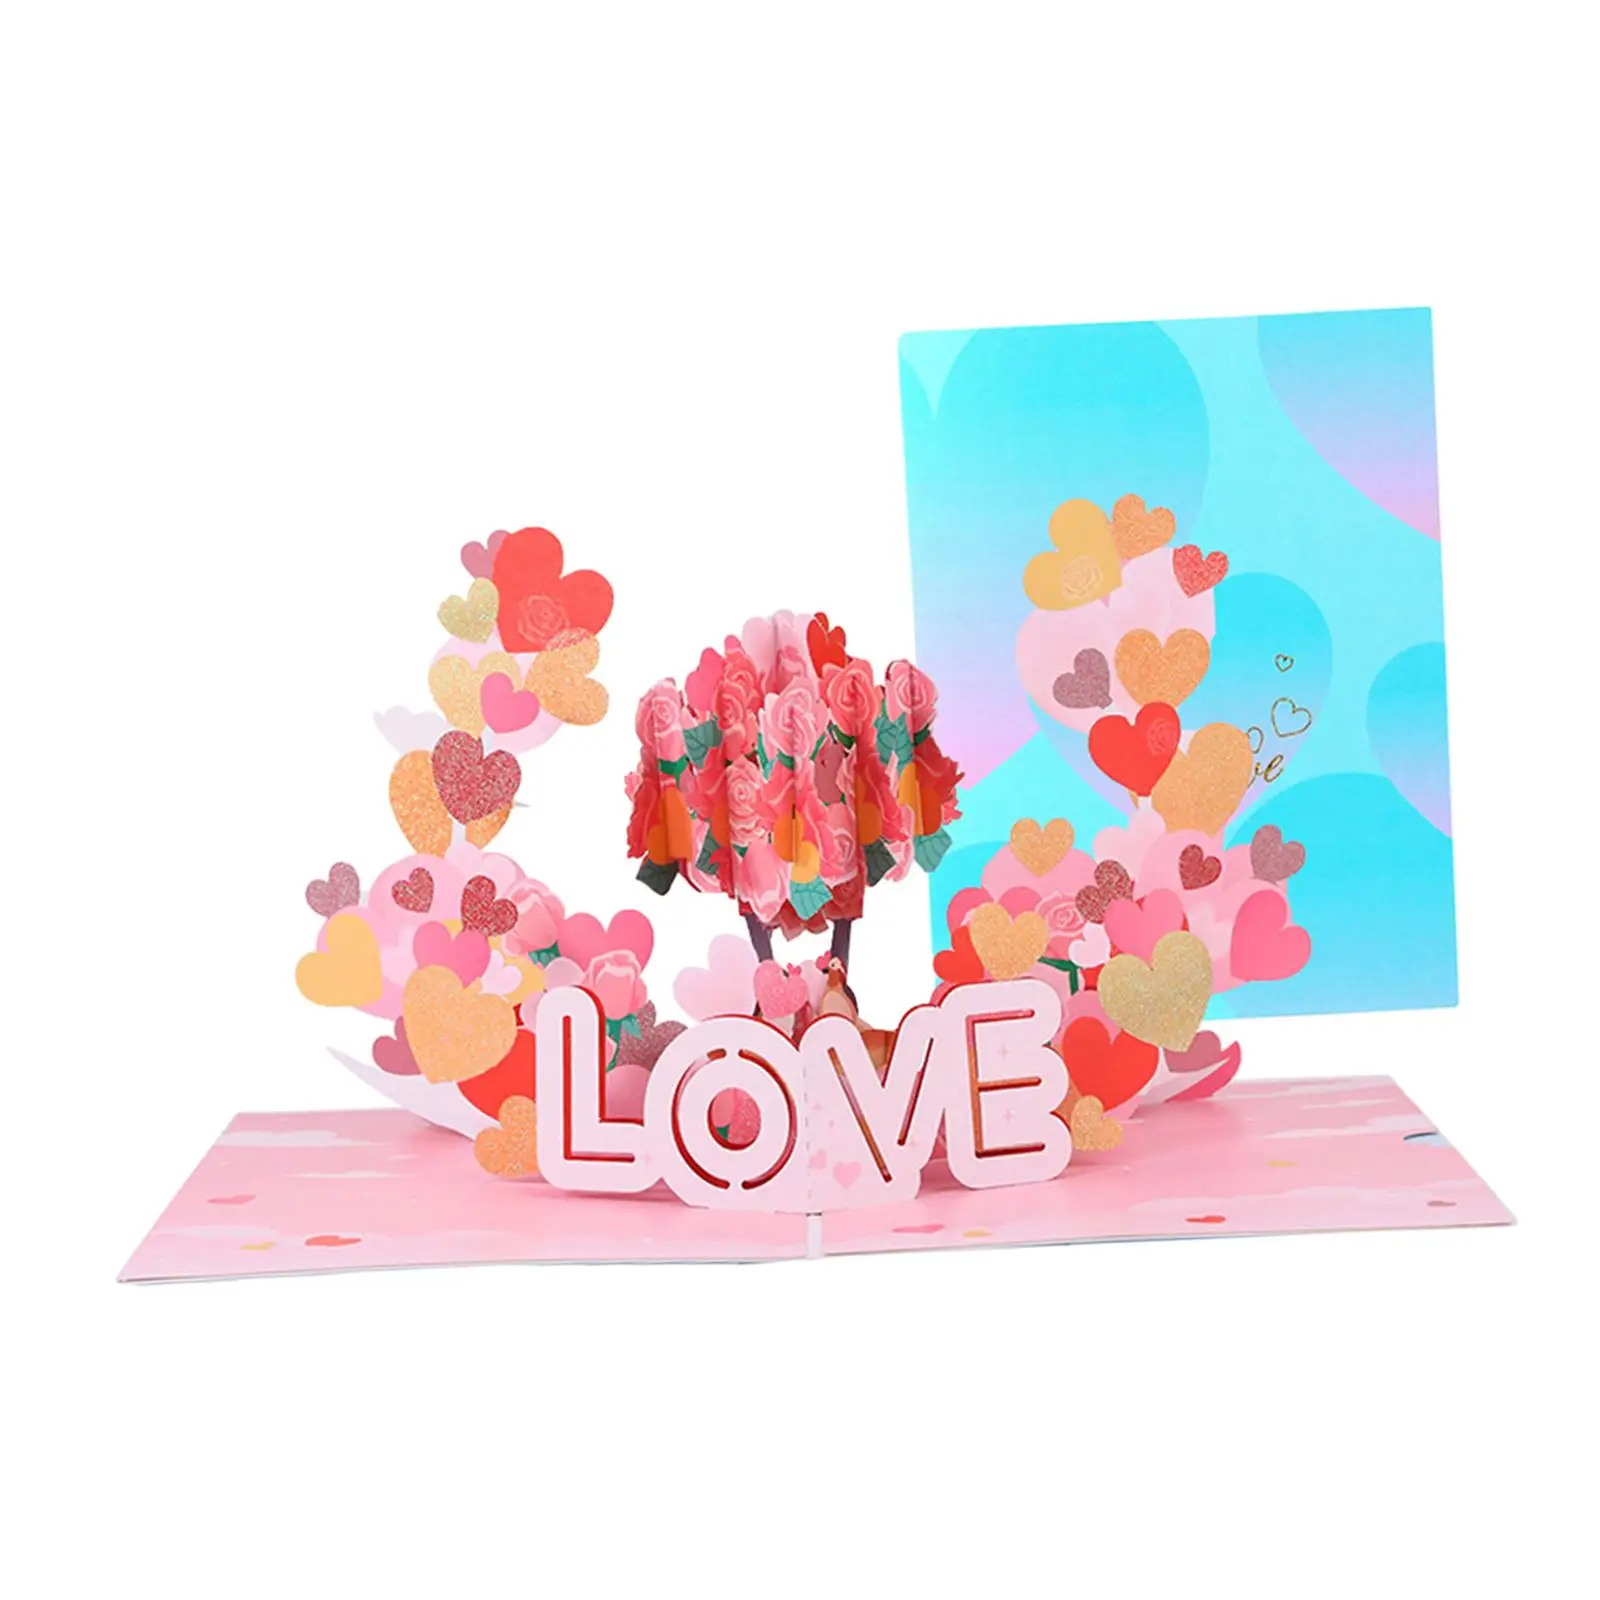 Paper Love Popup Card Valentines Day Cards for Celebration Birthday Friends